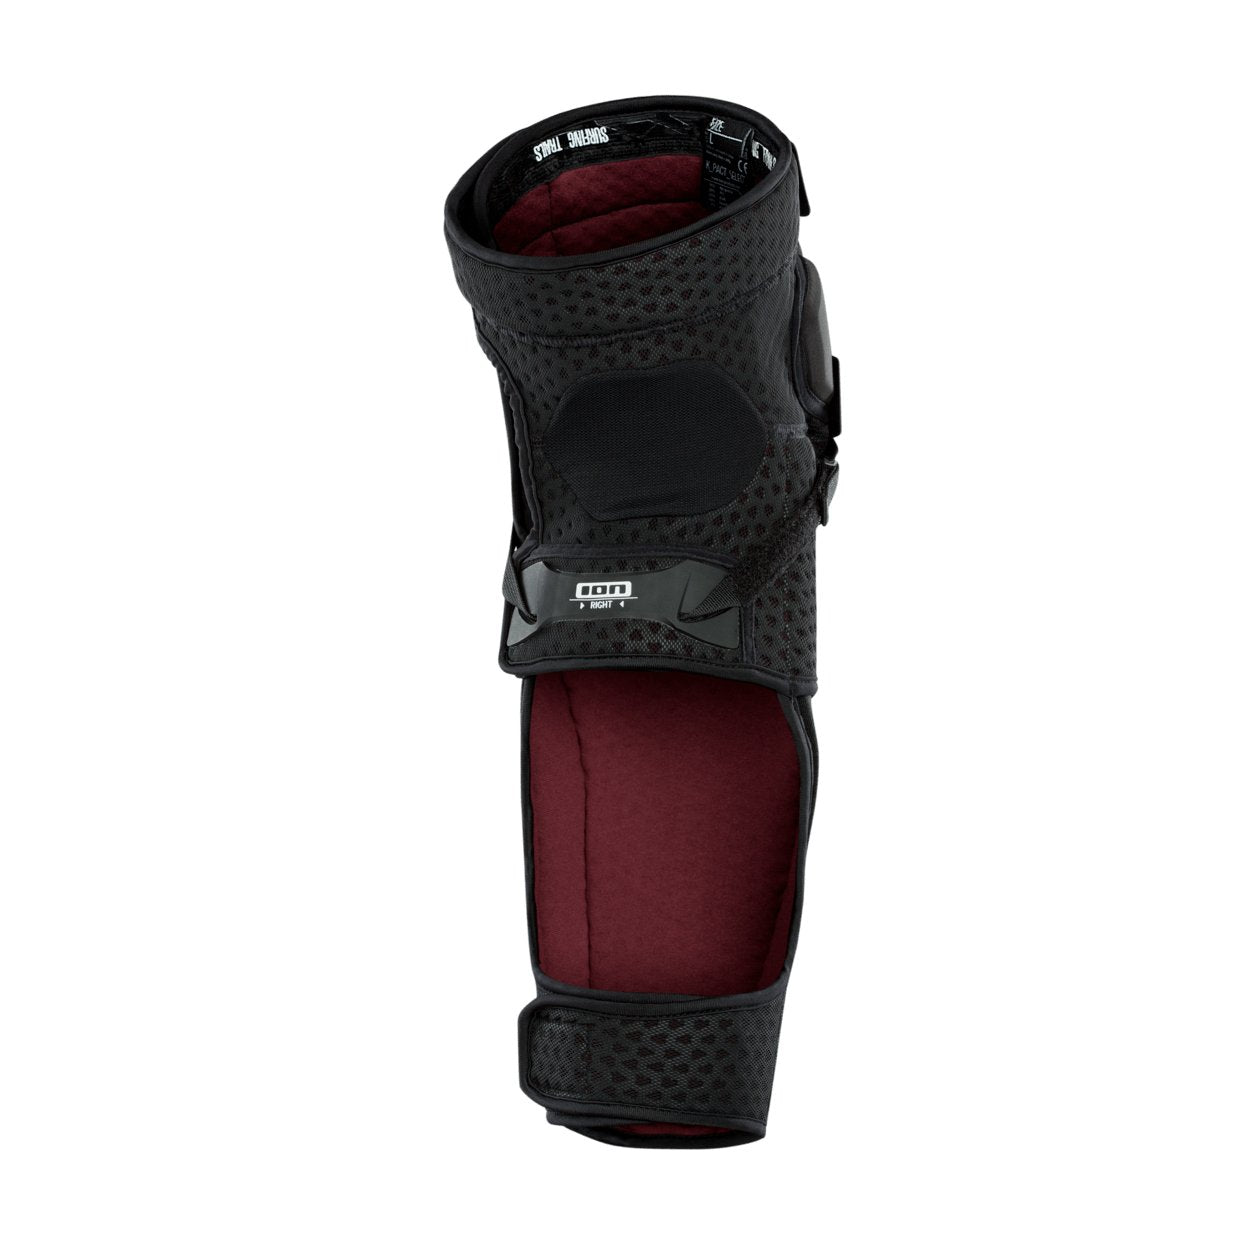 ION MTB Knee Pads K-Pact Select 2024 - Worthing Watersports - 9008415827961 - Body Armor - ION Bike